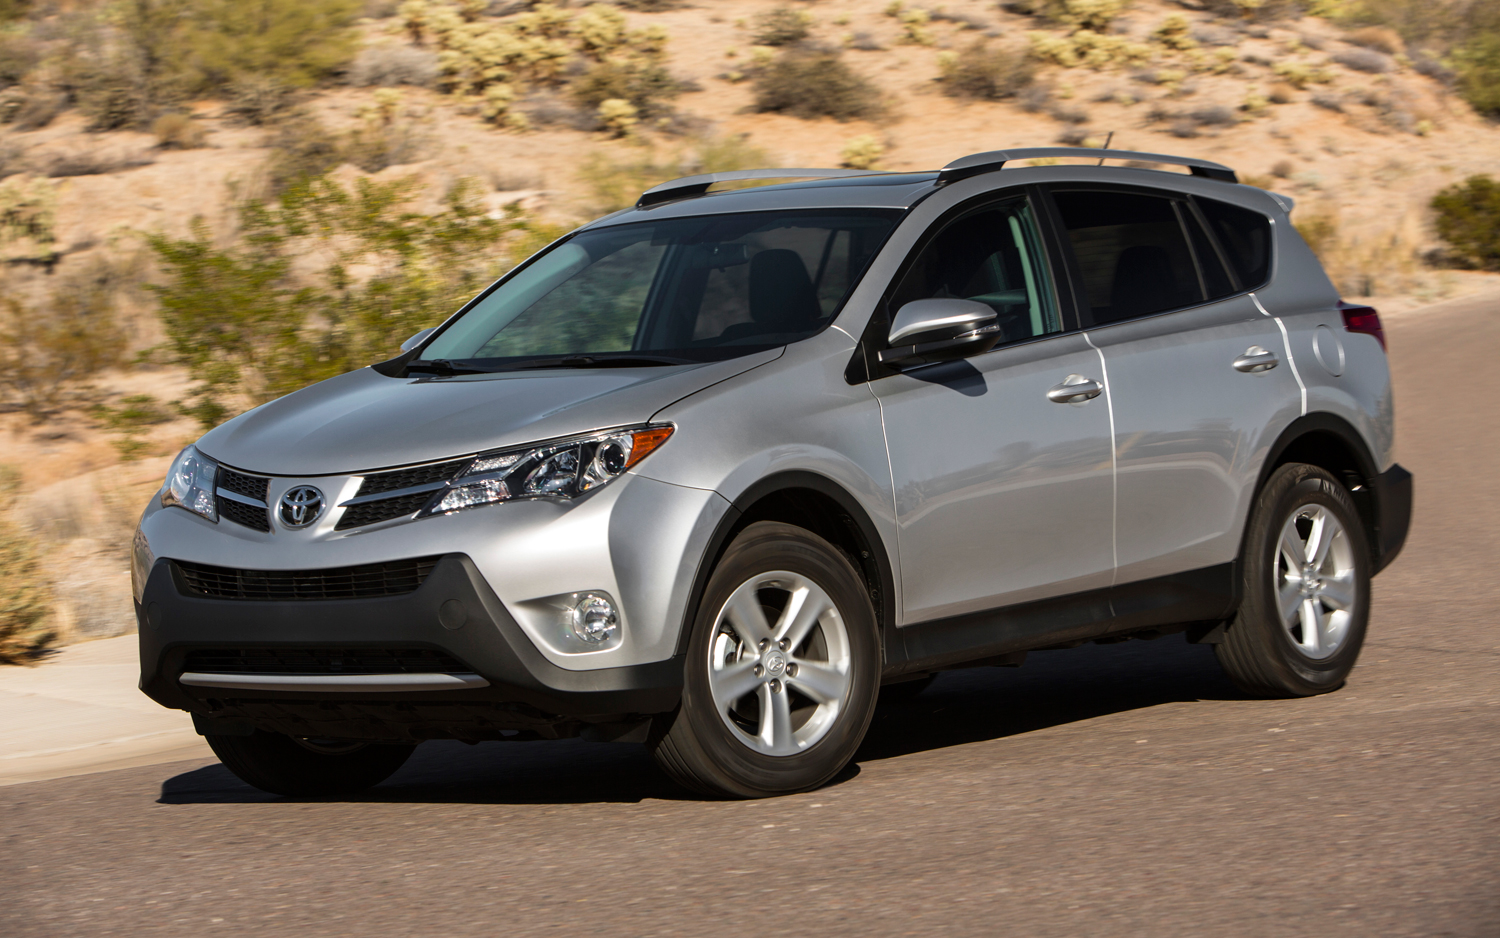 TOYOTA RAV4 Review and photos